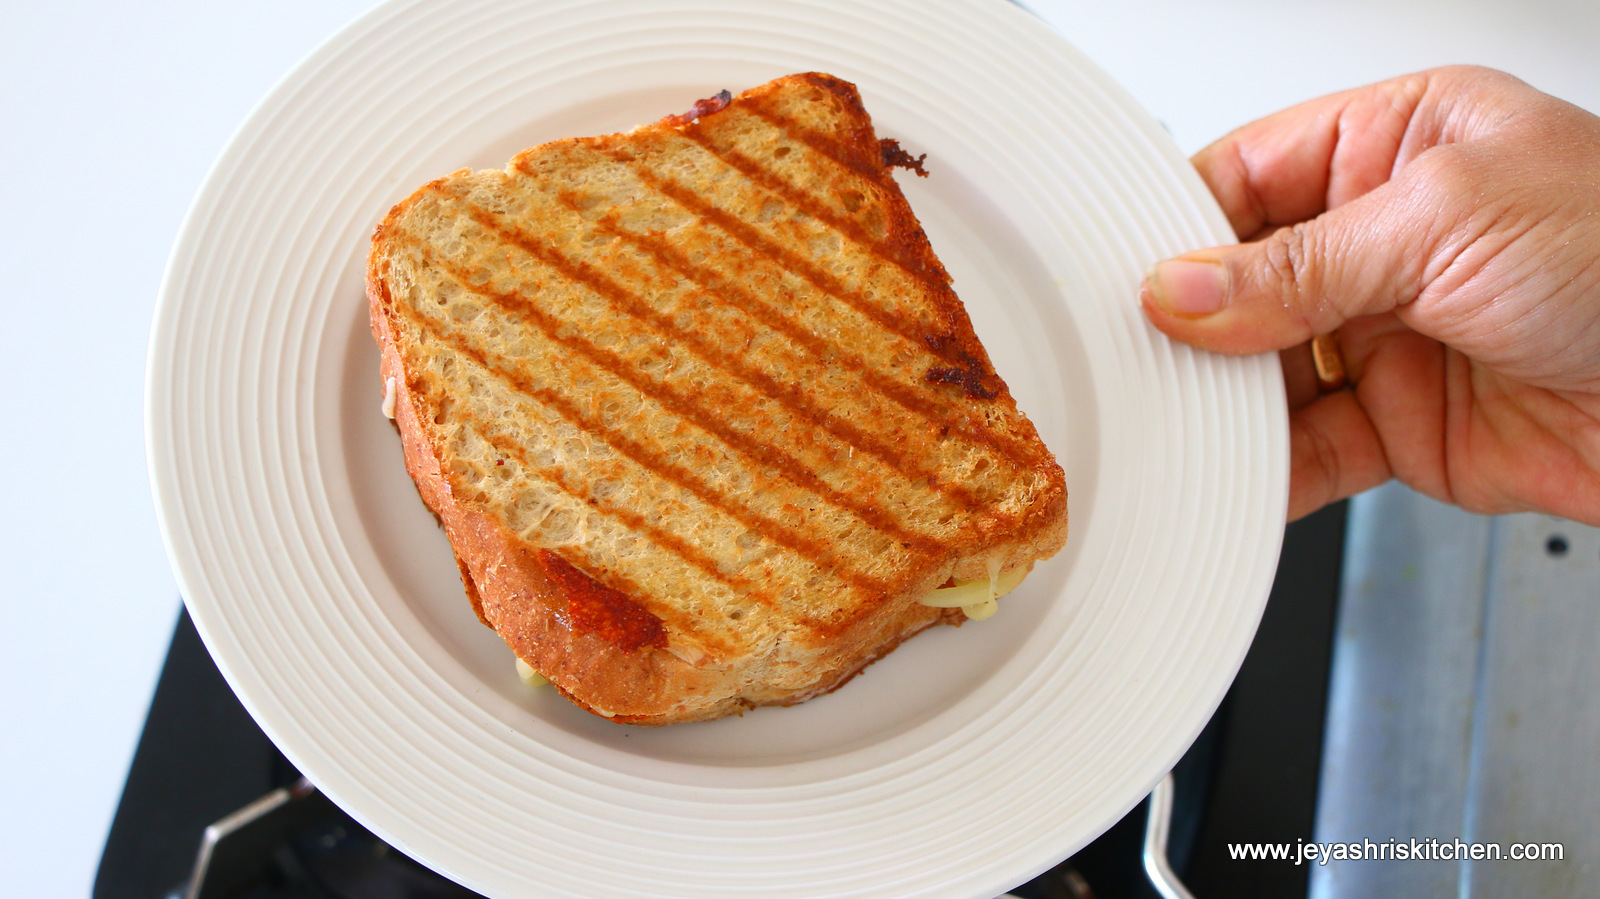 GRILLED CHEESE sandwich